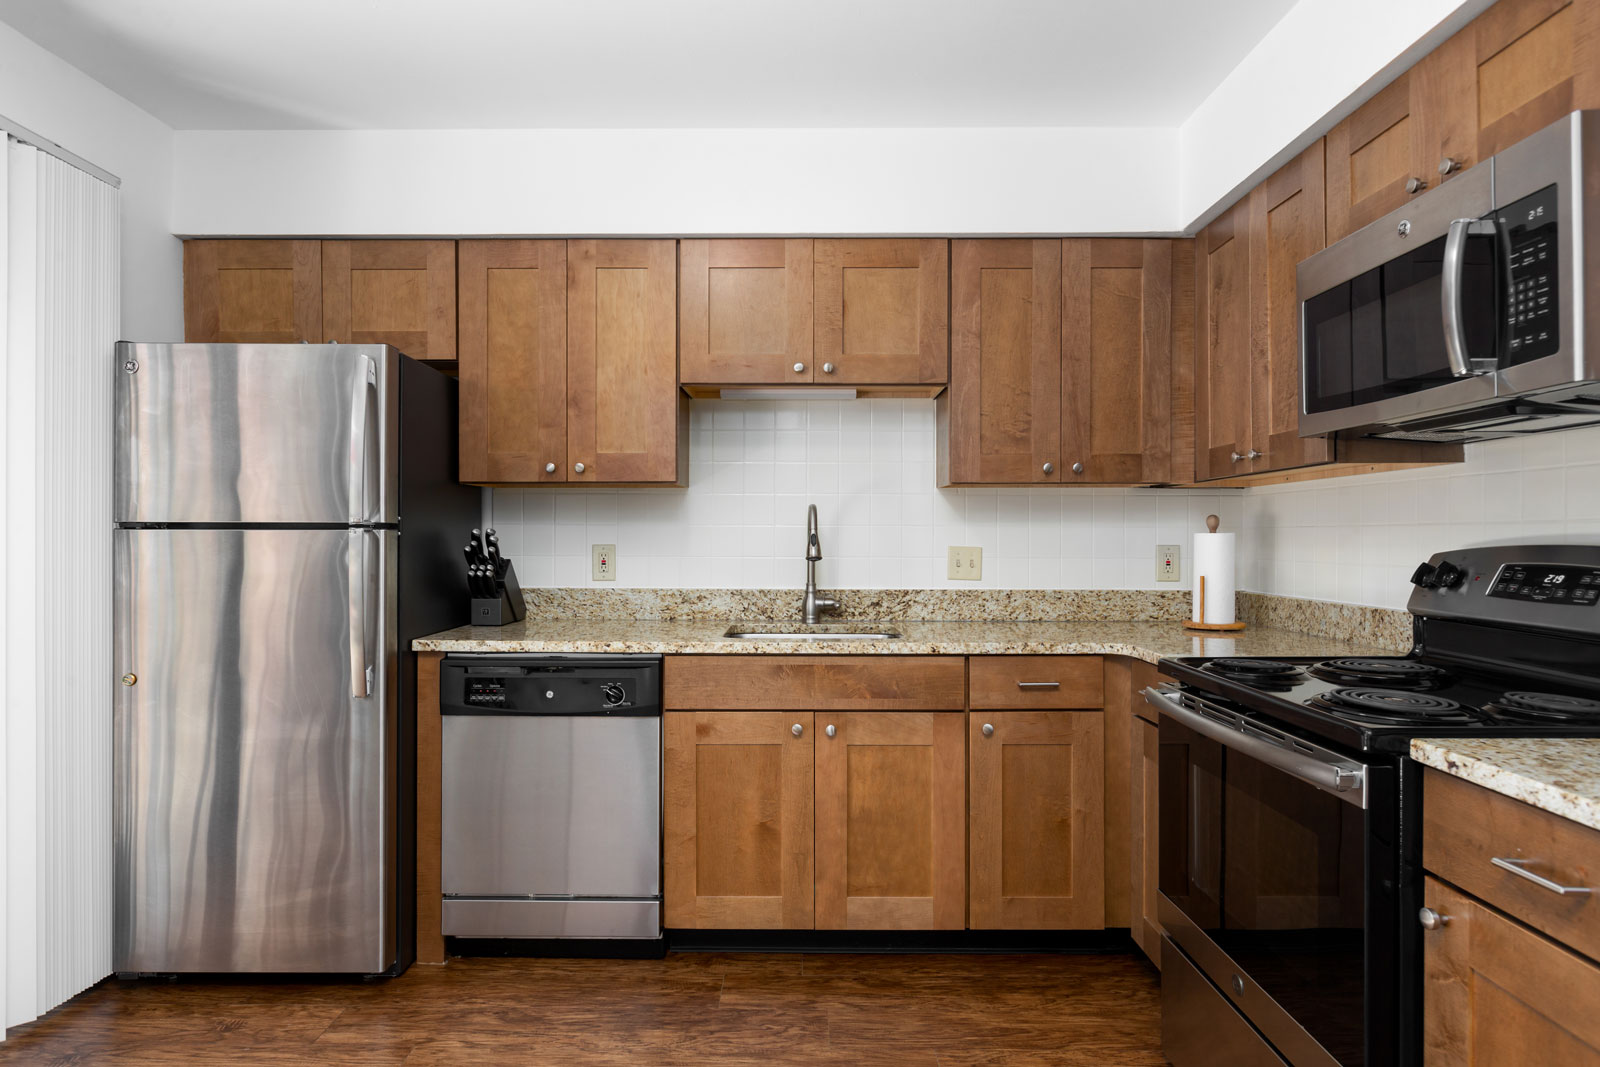 A kitchen with cabinets and stainless steel appliances at Chesterfield Village Apartments